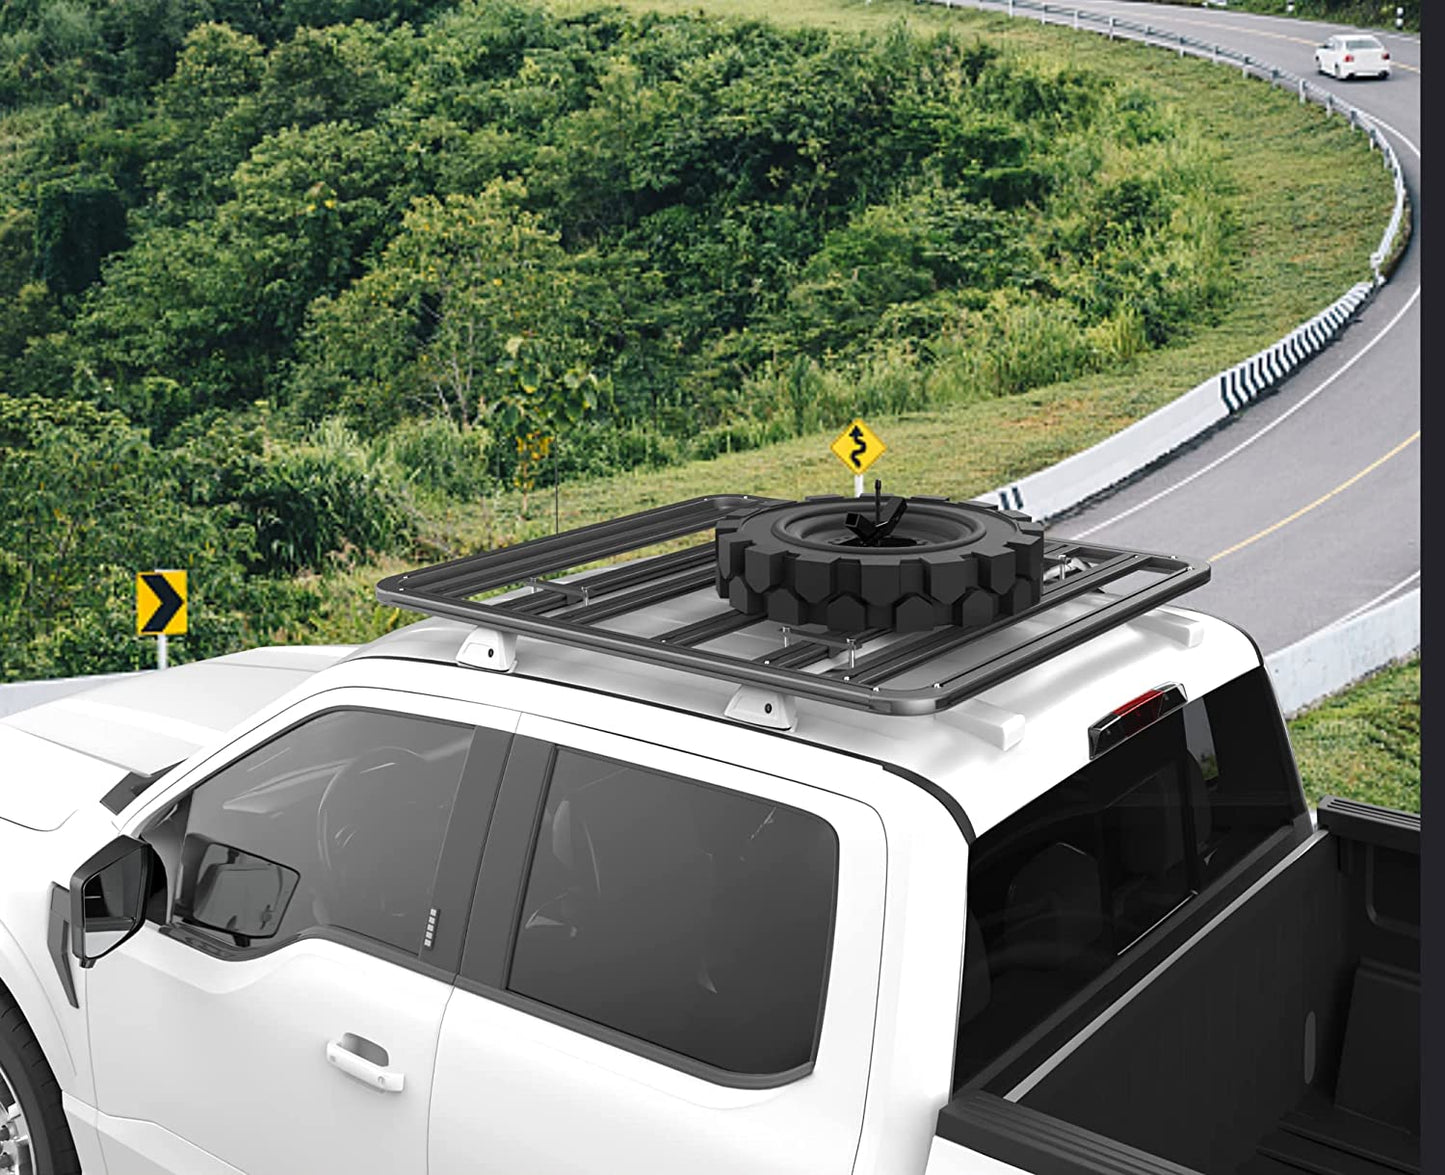 Universal Spare Tire Carrier for Roof Rack - MELIPRON